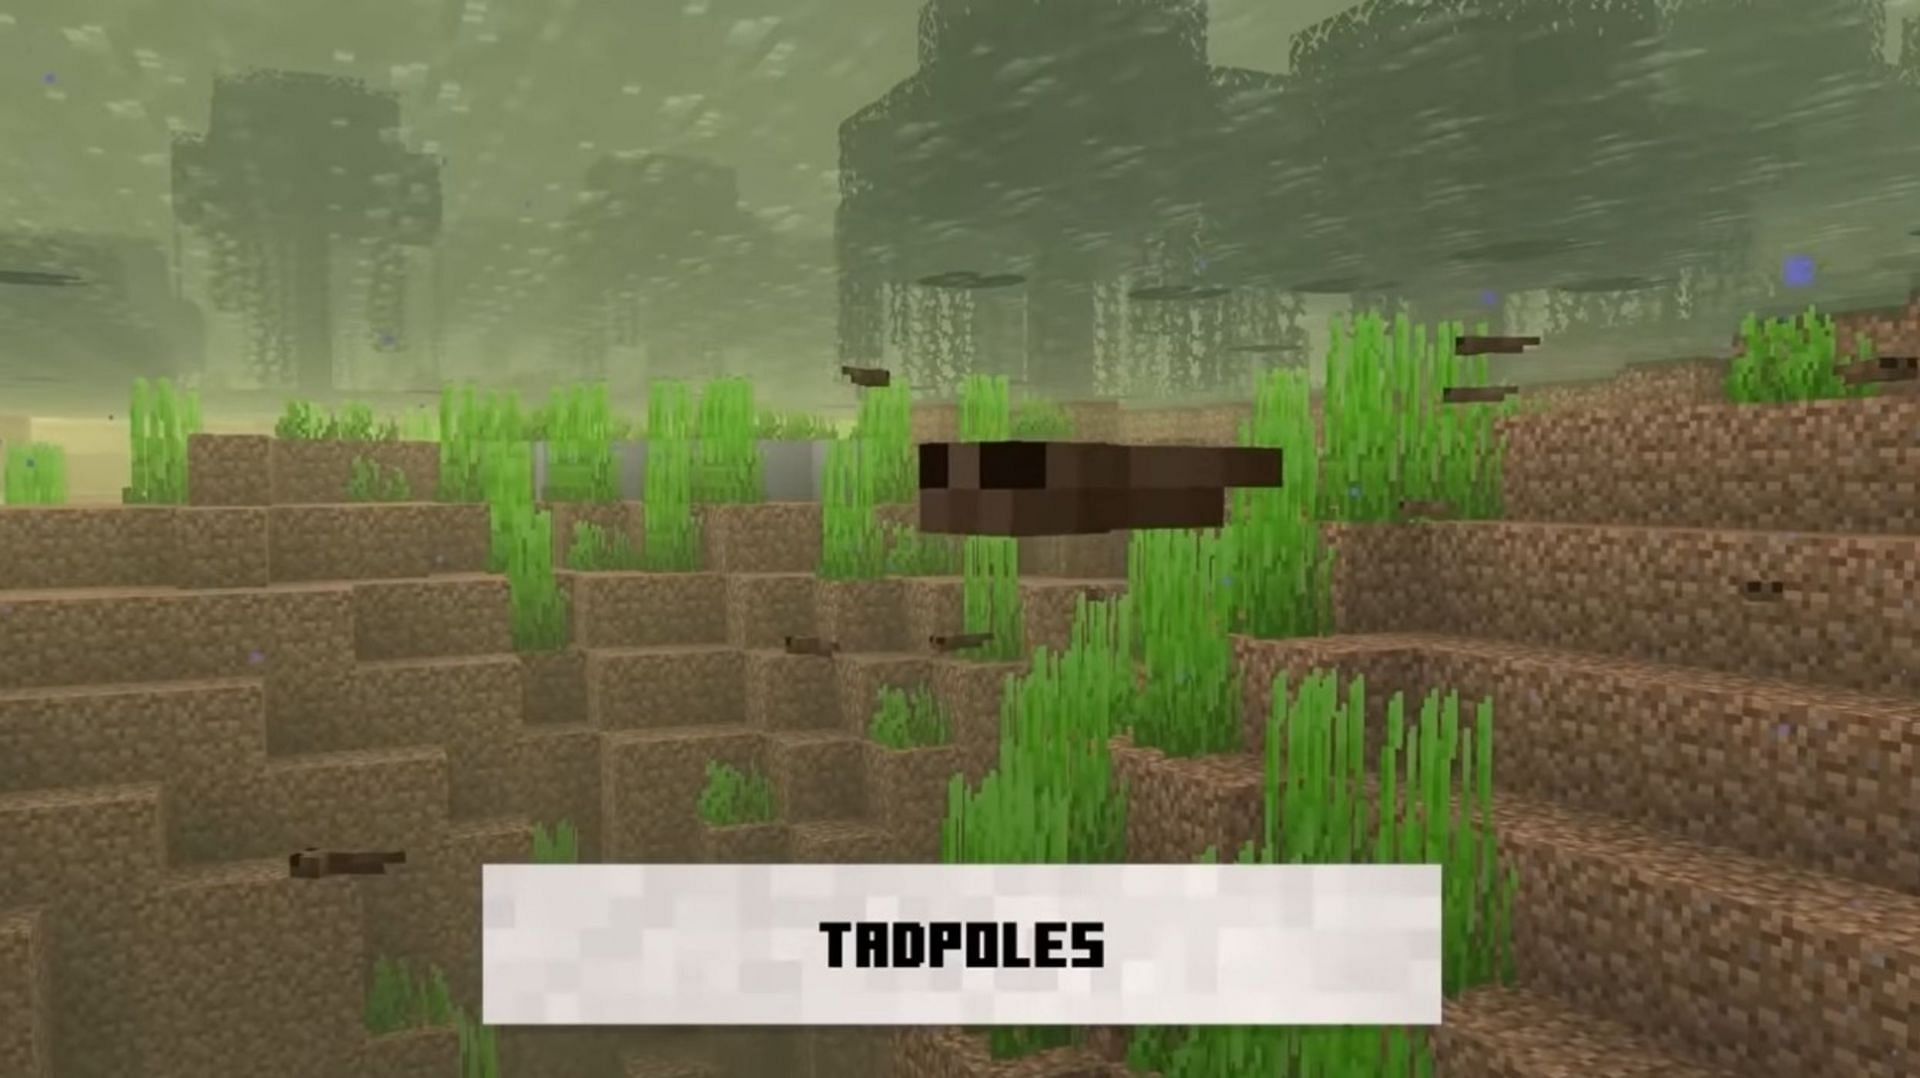 Tadpoles are the infant stage of frogs (Image via Mojang)